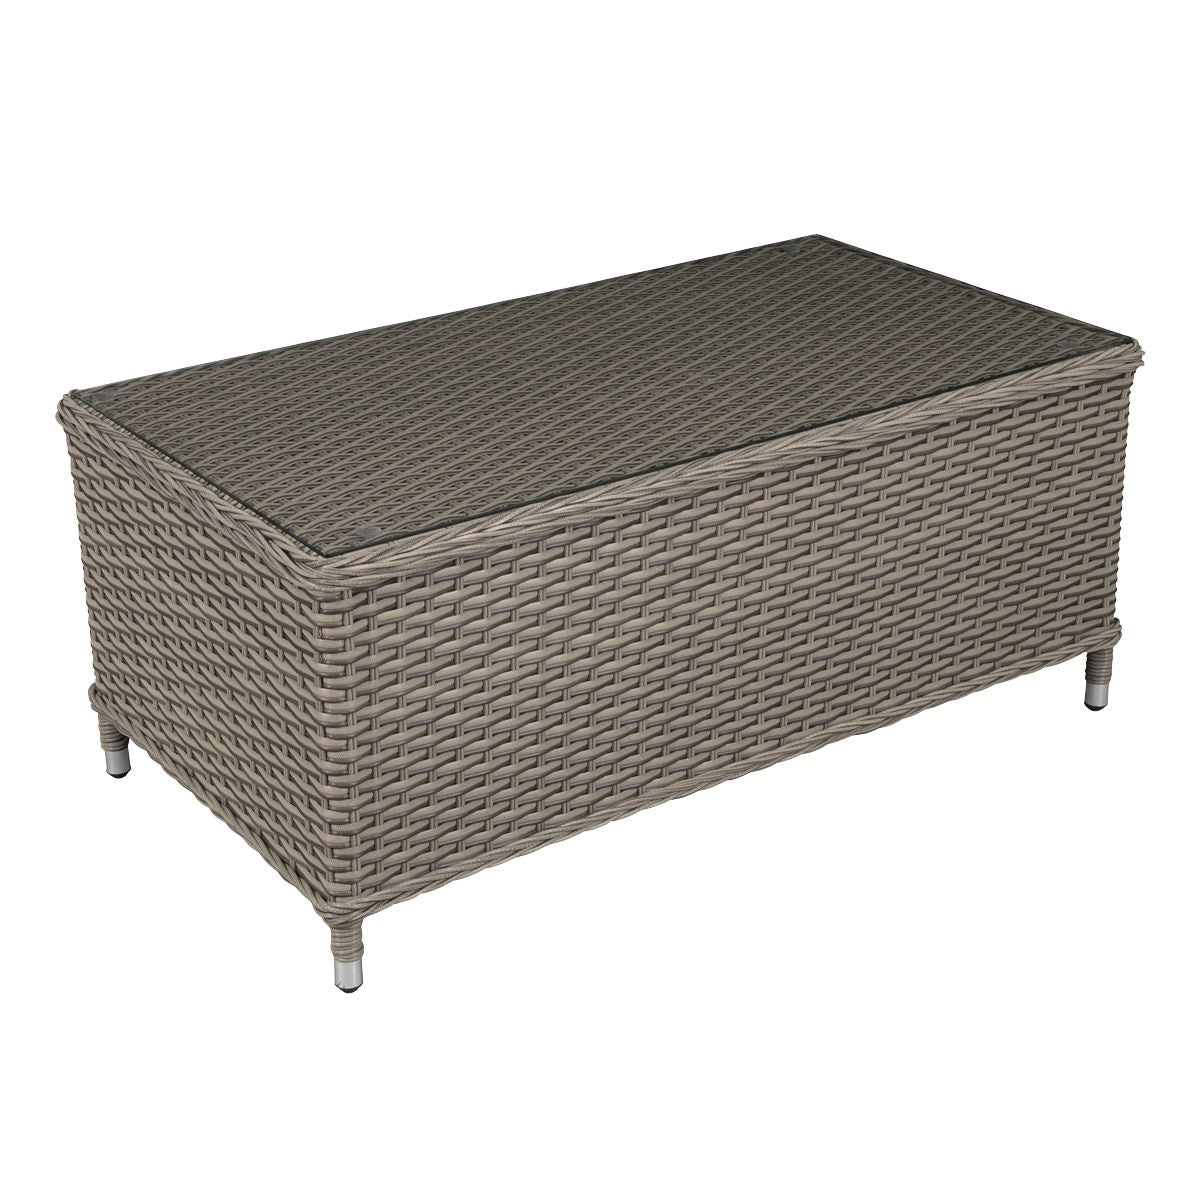 Dellonda Chester Rattan Wicker Outdoor Coffee Table with Tempered Glass Top, Brown